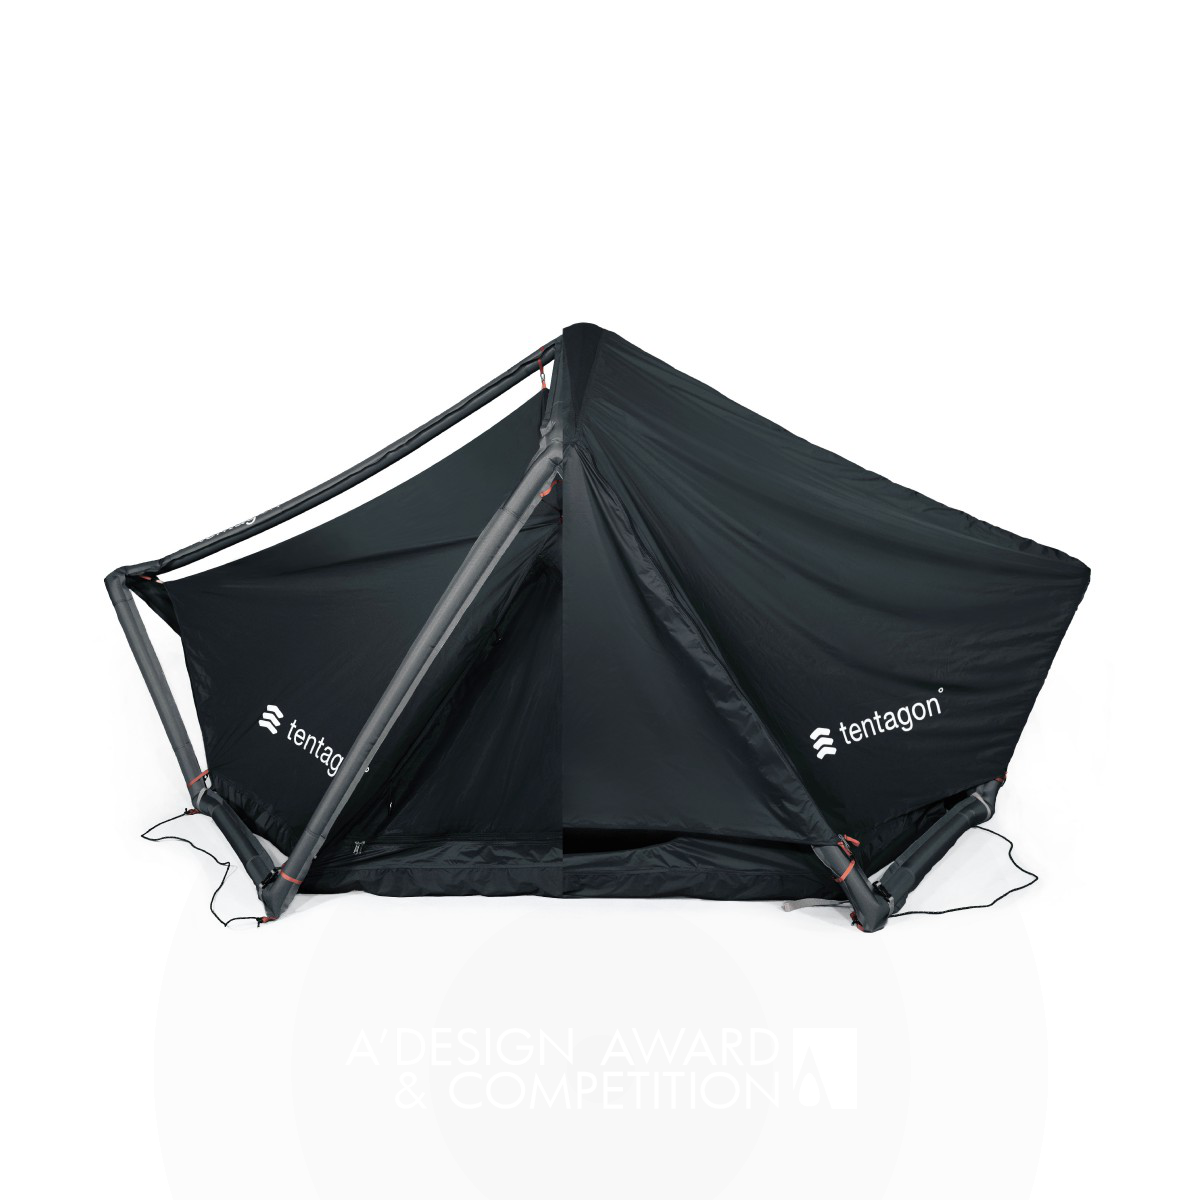 Tentagon: Redefining Camping Comfort with Lightweight Inflatable Technology